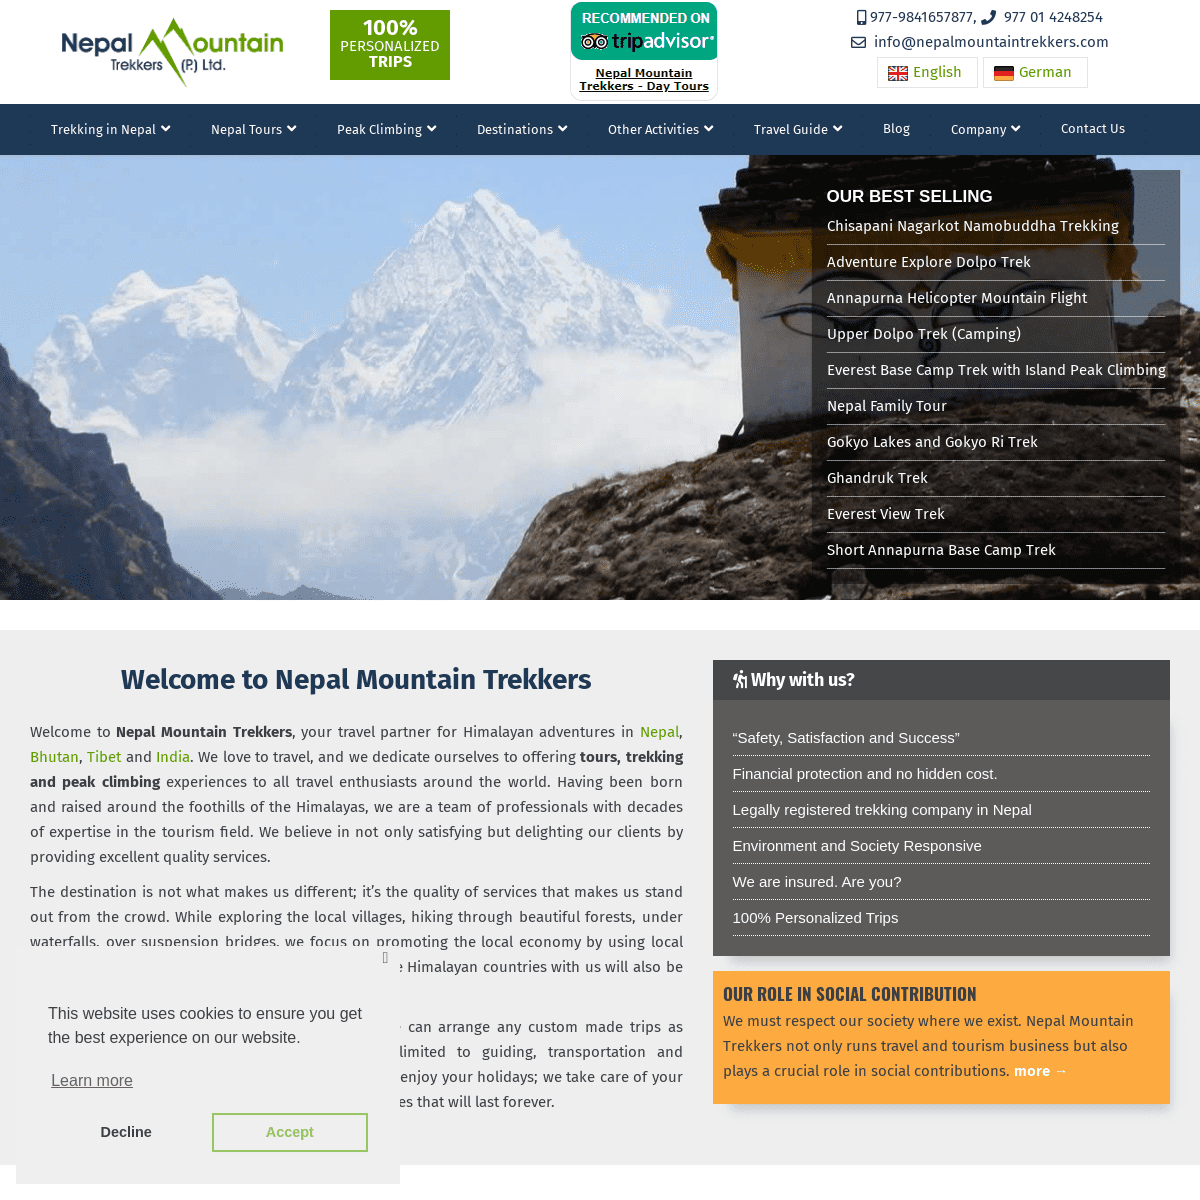 A complete backup of nepalmountaintrekkers.com